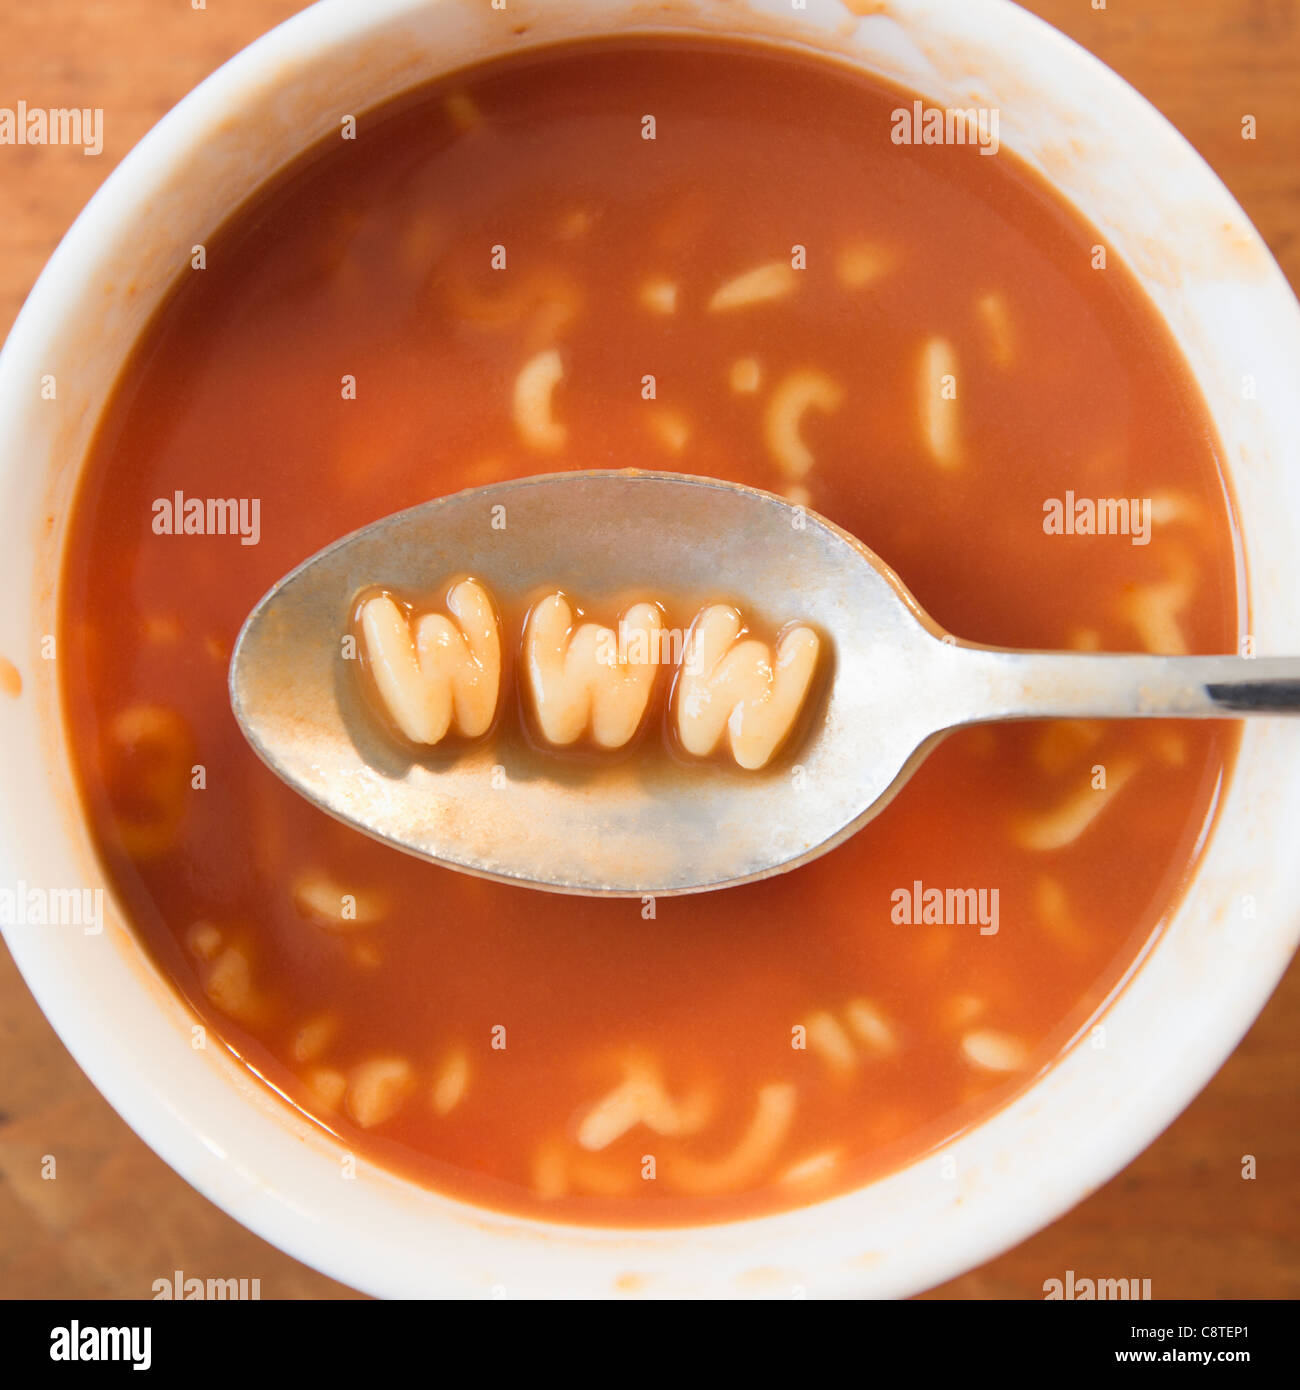 Close up of soup with letter noodles on spoon forming www site Stock Photo